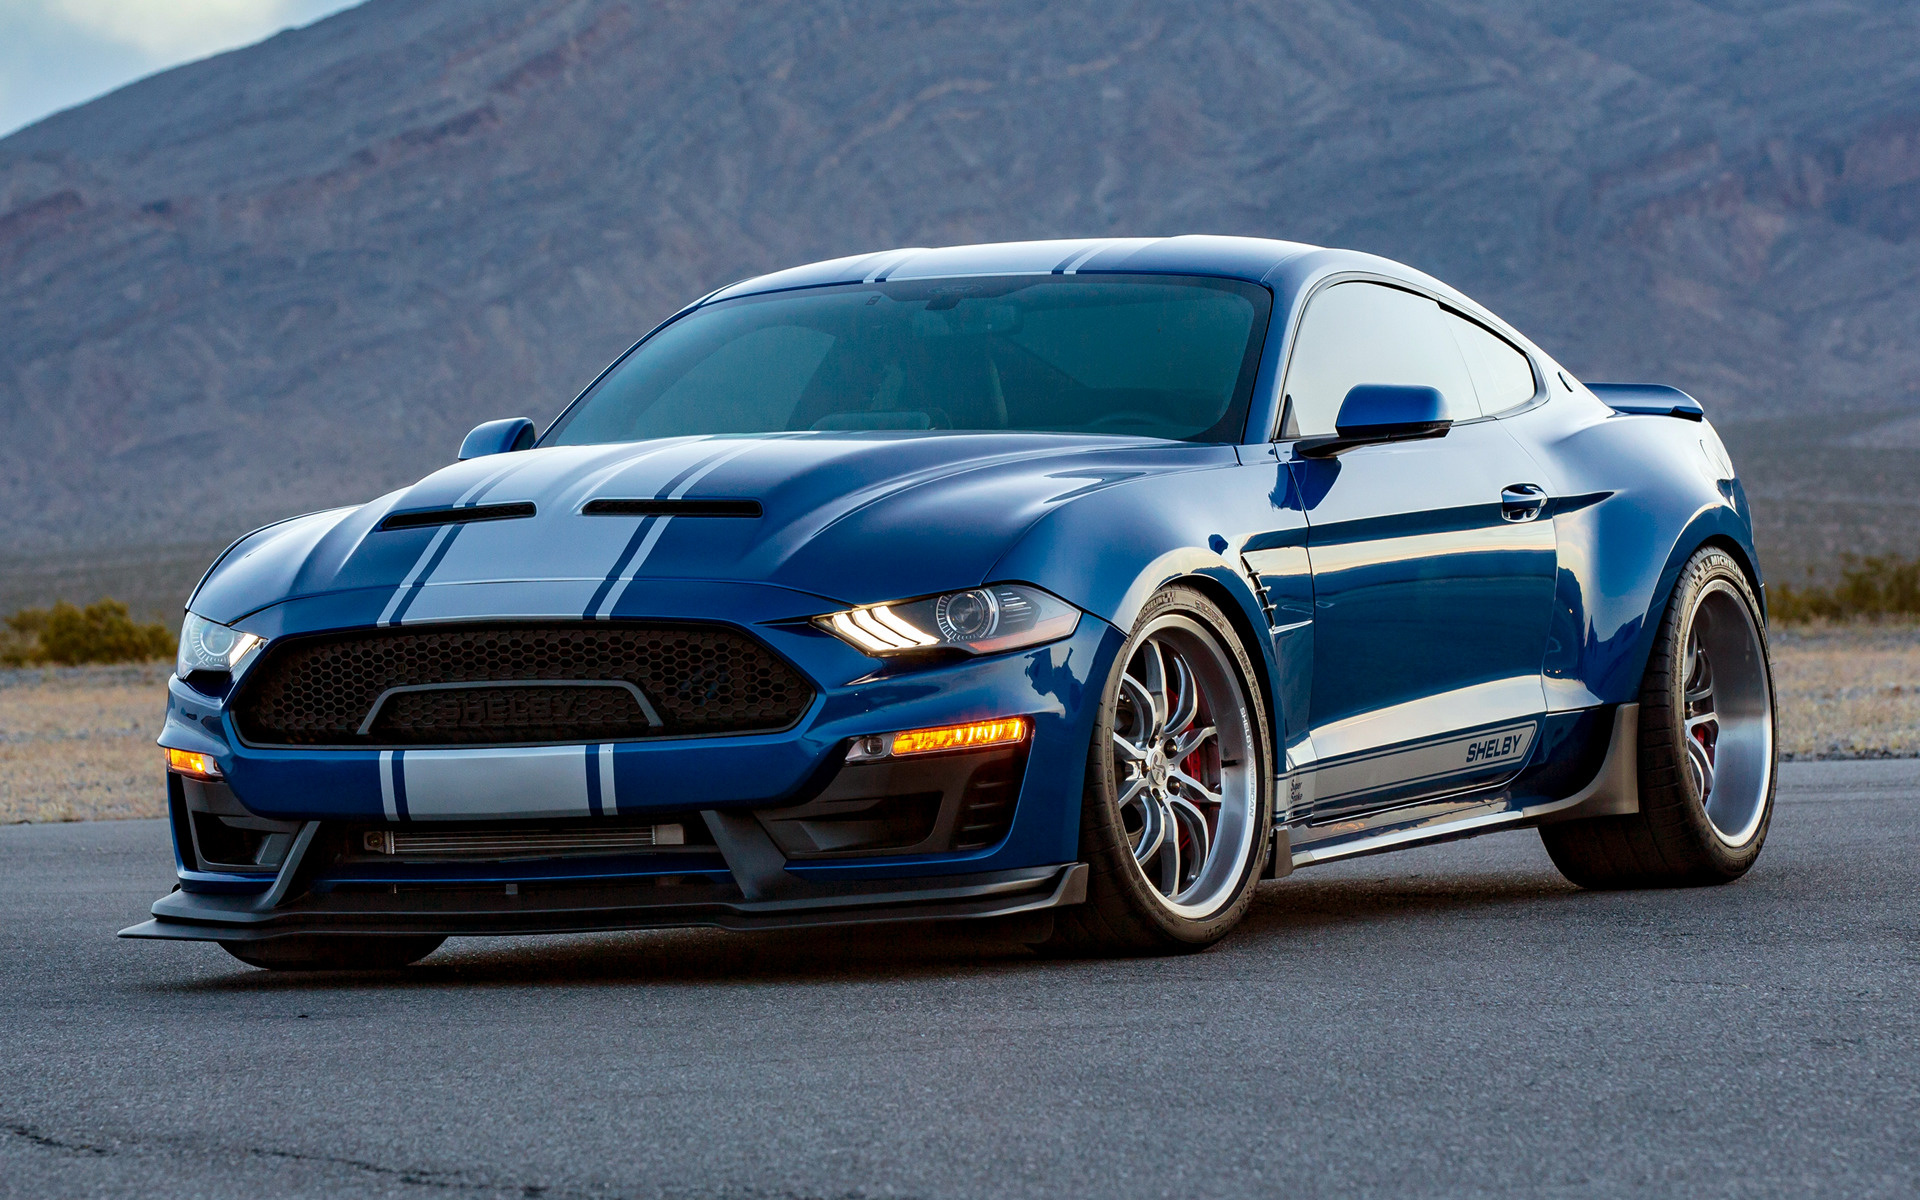 2018 Shelby Super Snake Widebody - Wallpapers and HD Images | Car Pixel